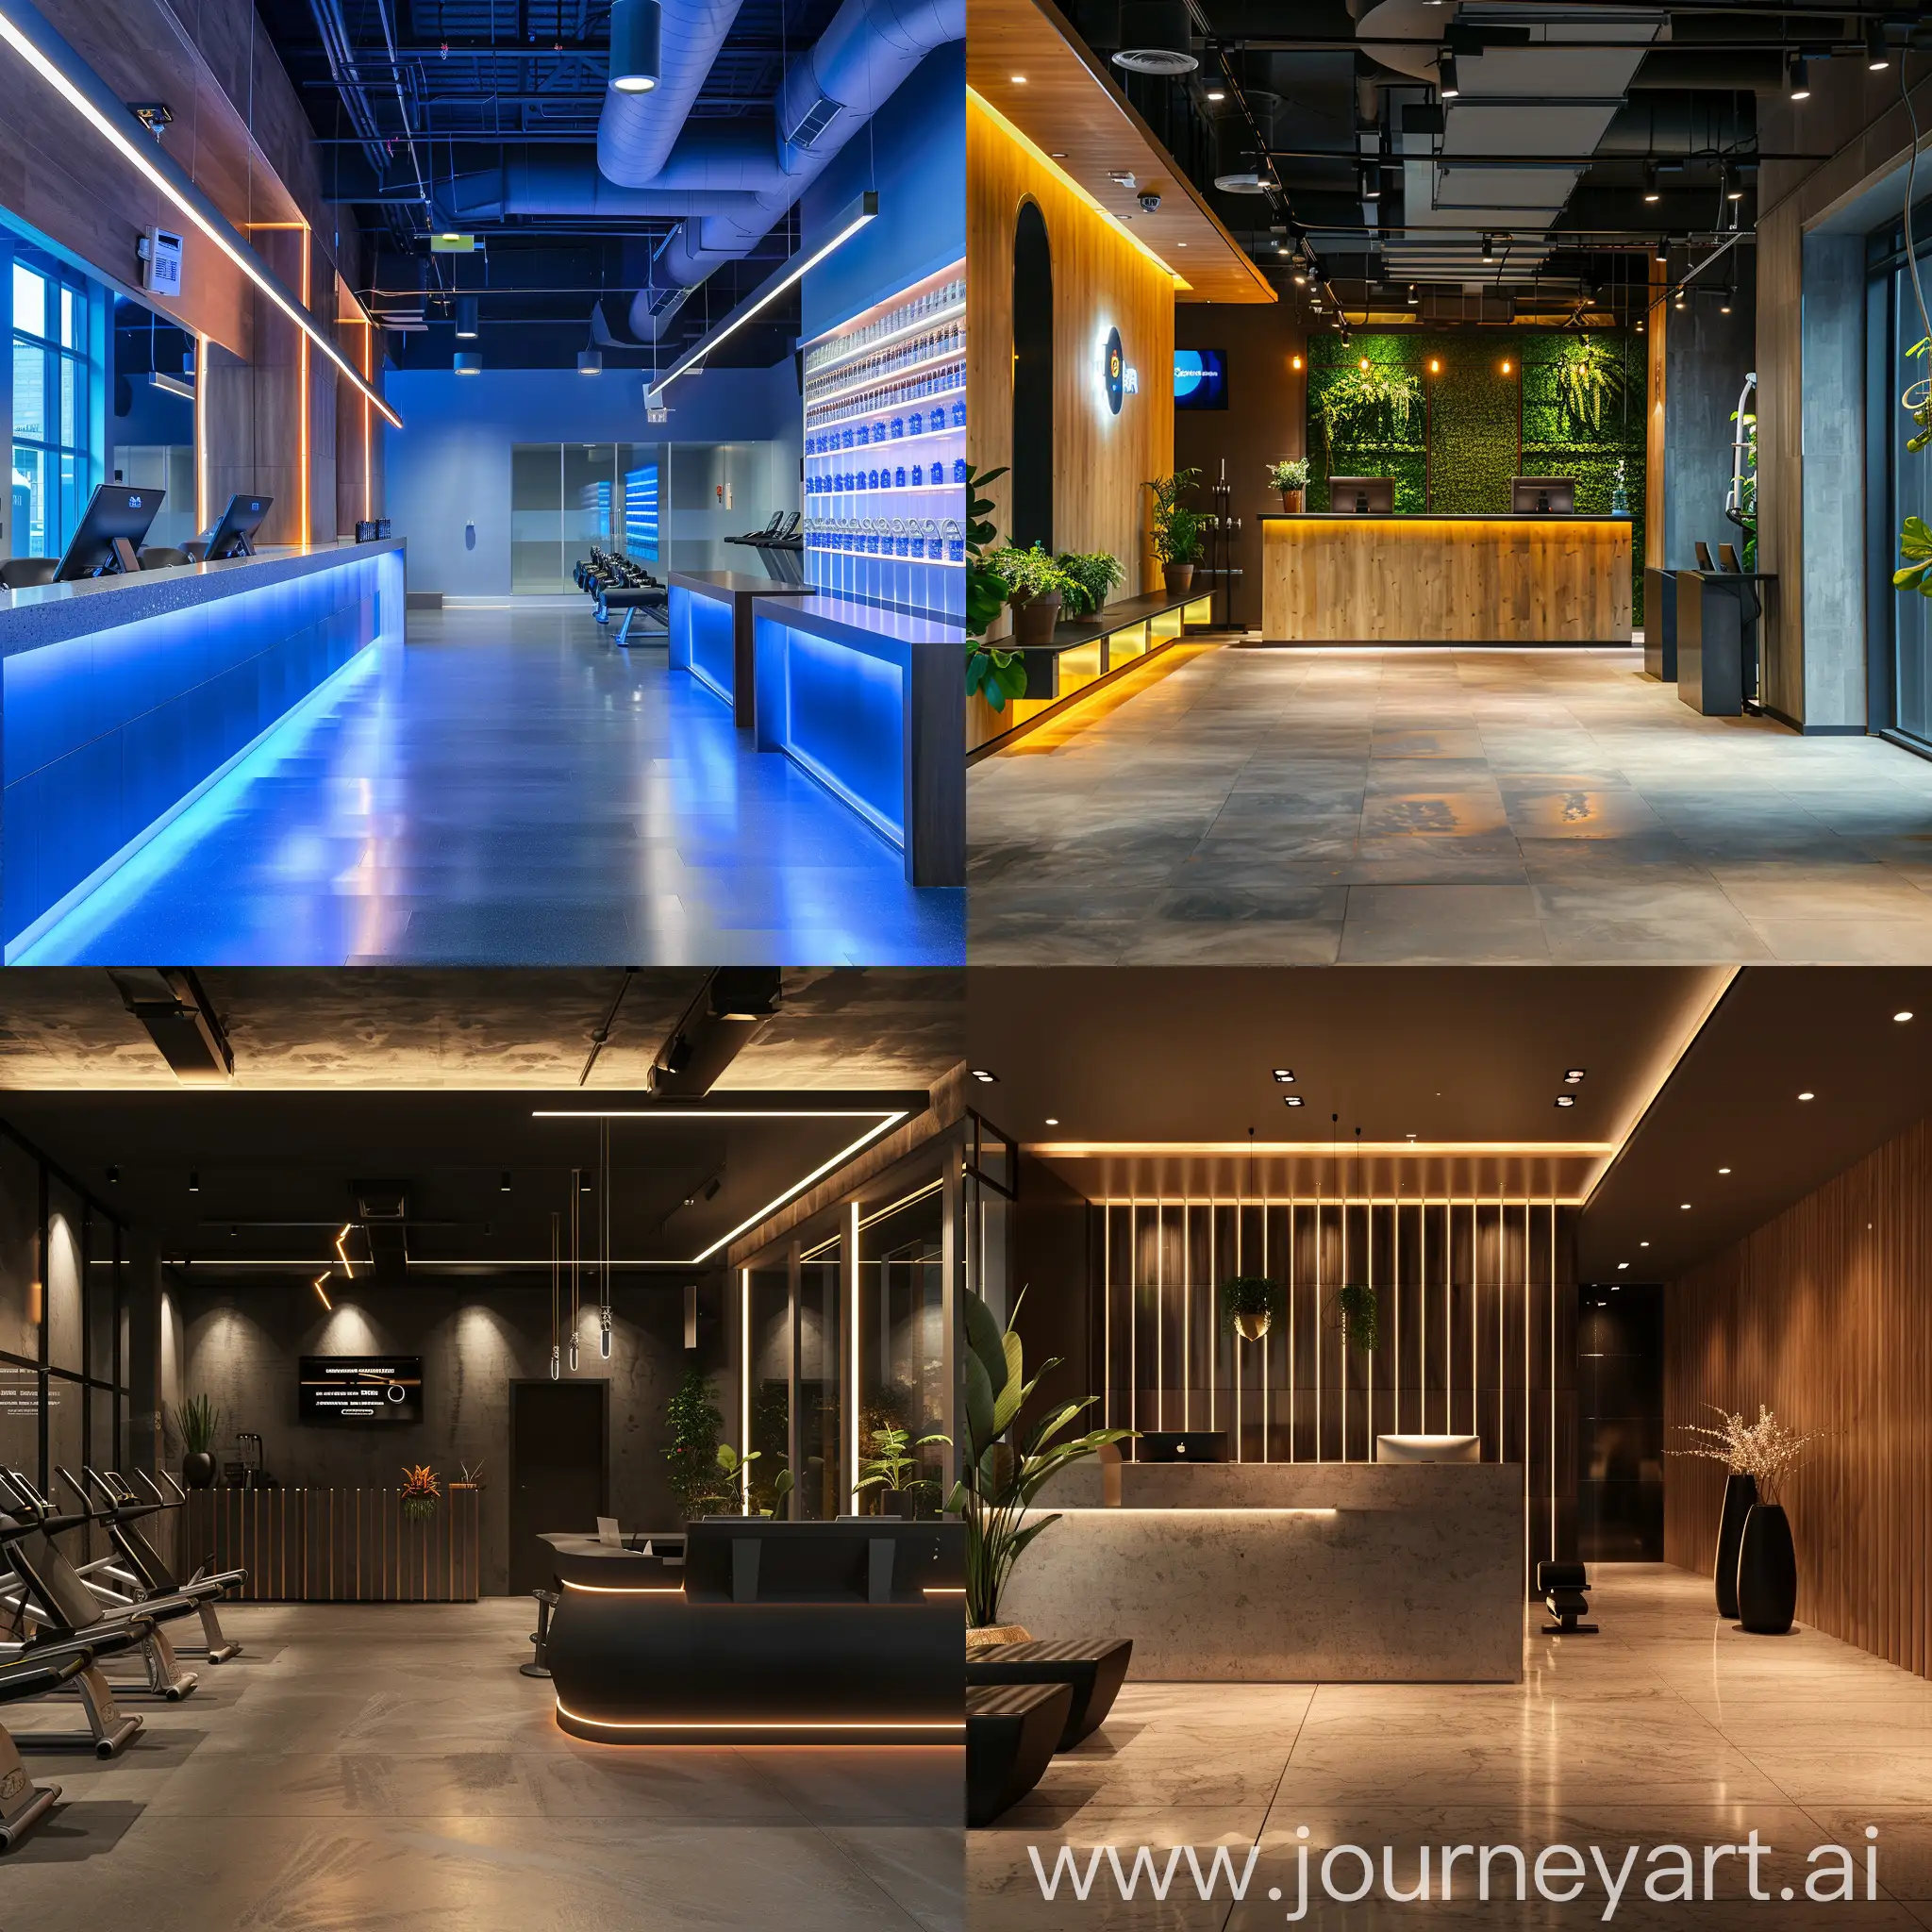 Luxurious-Reception-Area-of-a-Premium-Fitness-Club